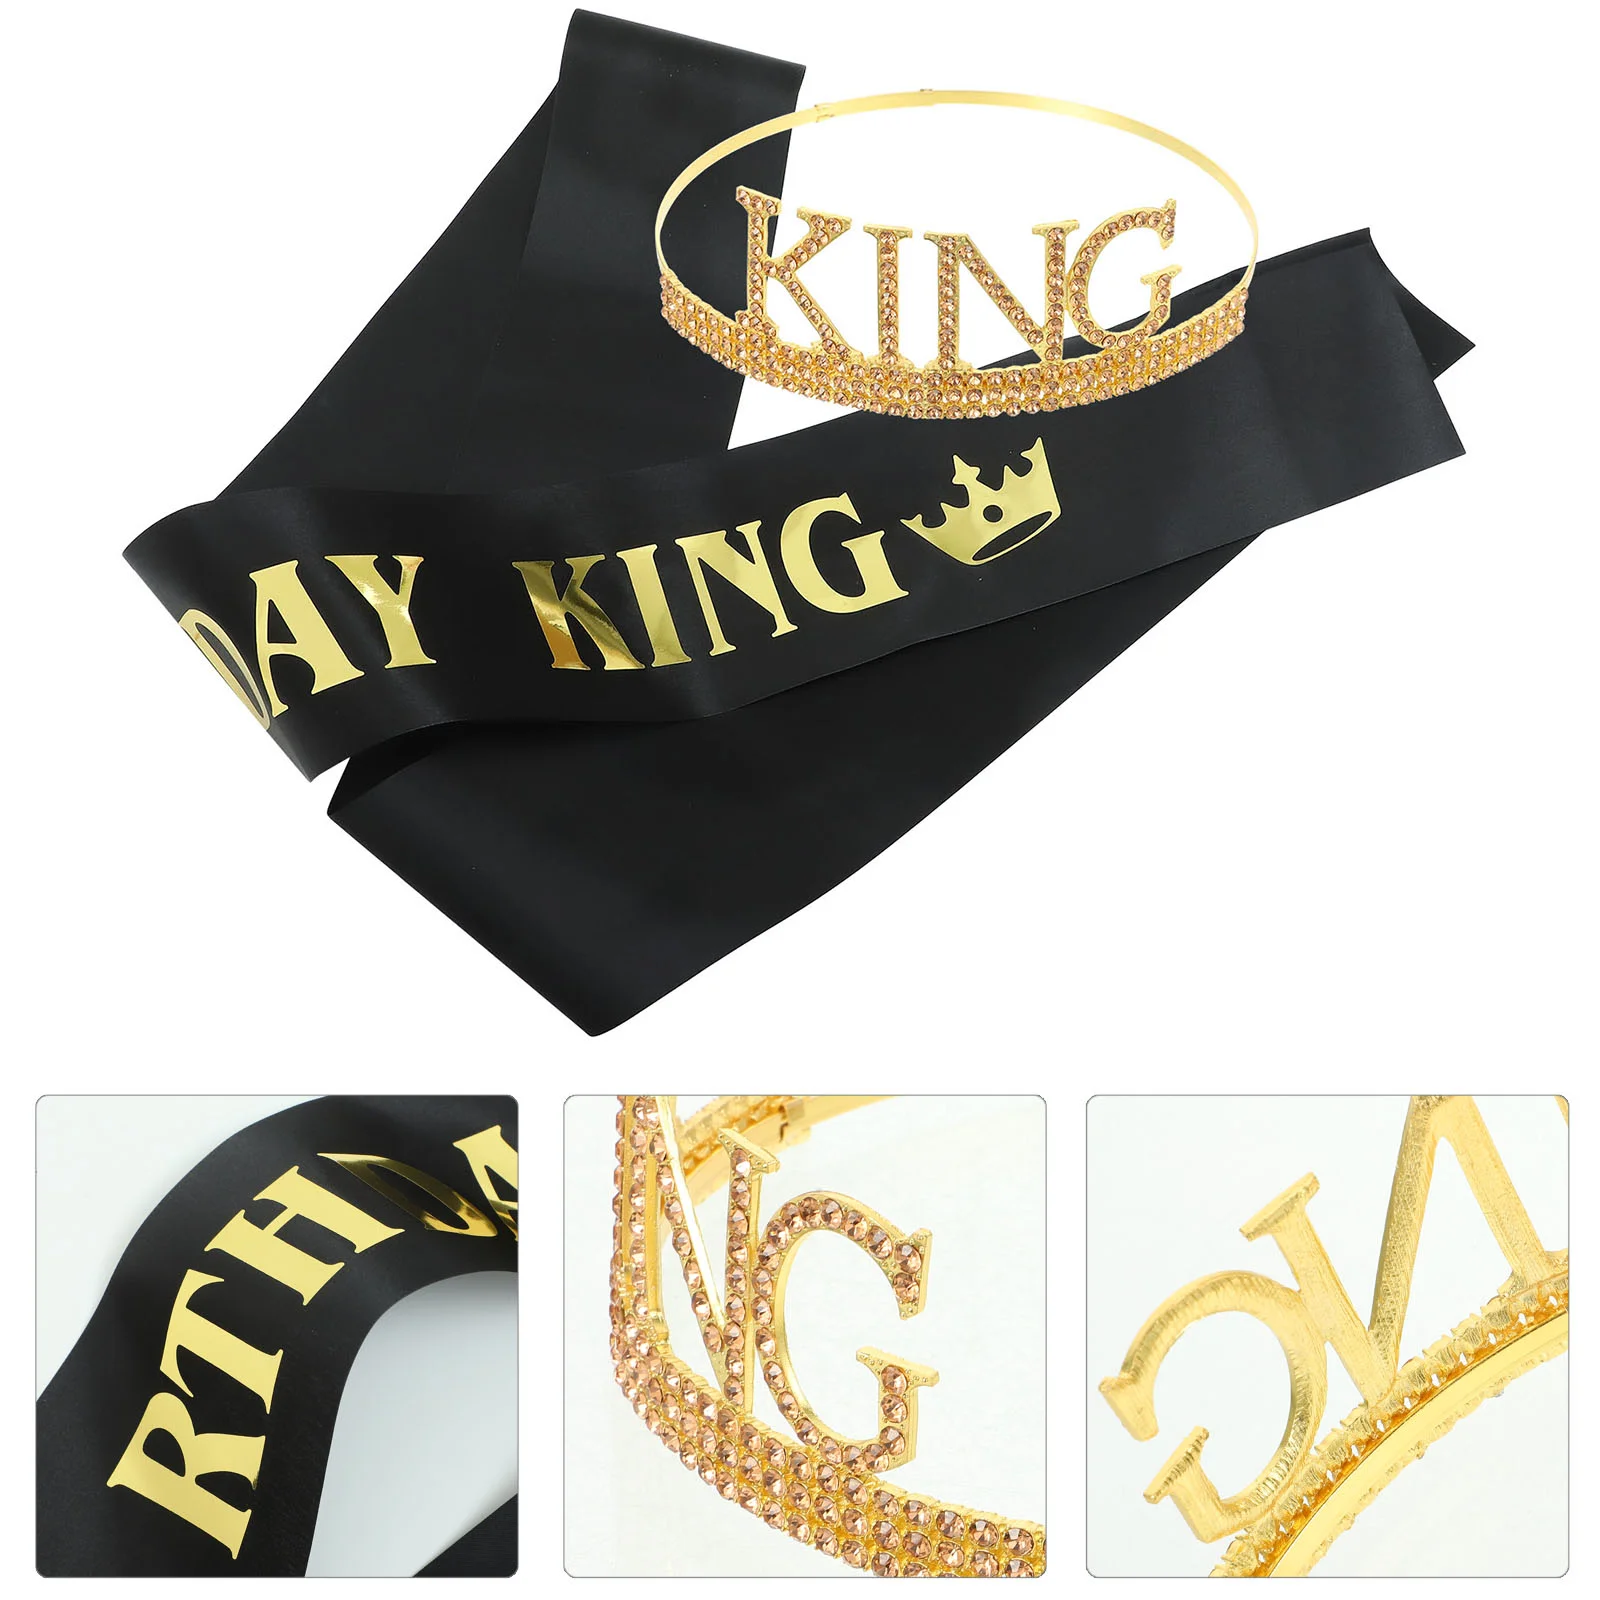 

Birthday Sash For Men Crowns Props Party Supplies And Tiara Accessories Decorations Happy Shoulder Strap Gifts Belt